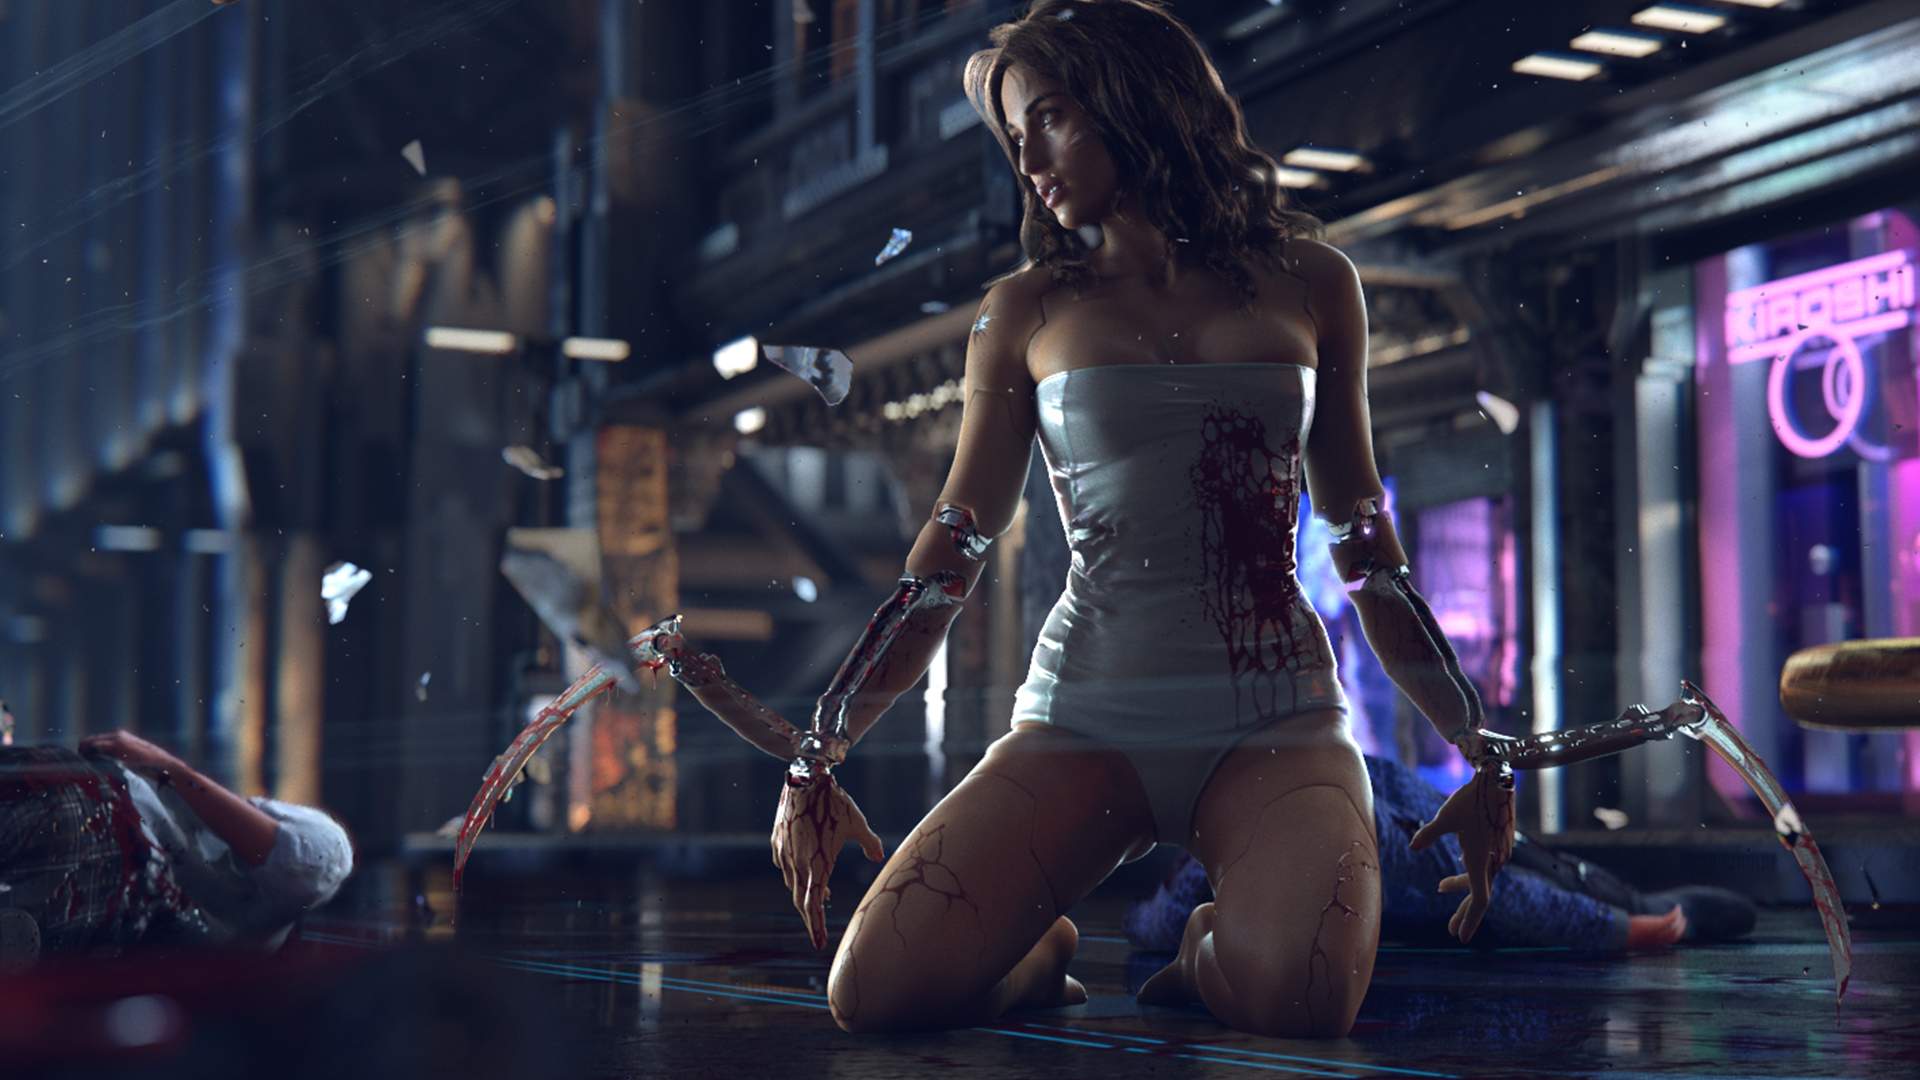 A shot from the Cyberpunk: 2077 trailer, with a woman covered in blood and nearly naked. She has cybernetic attachments on her wrists.